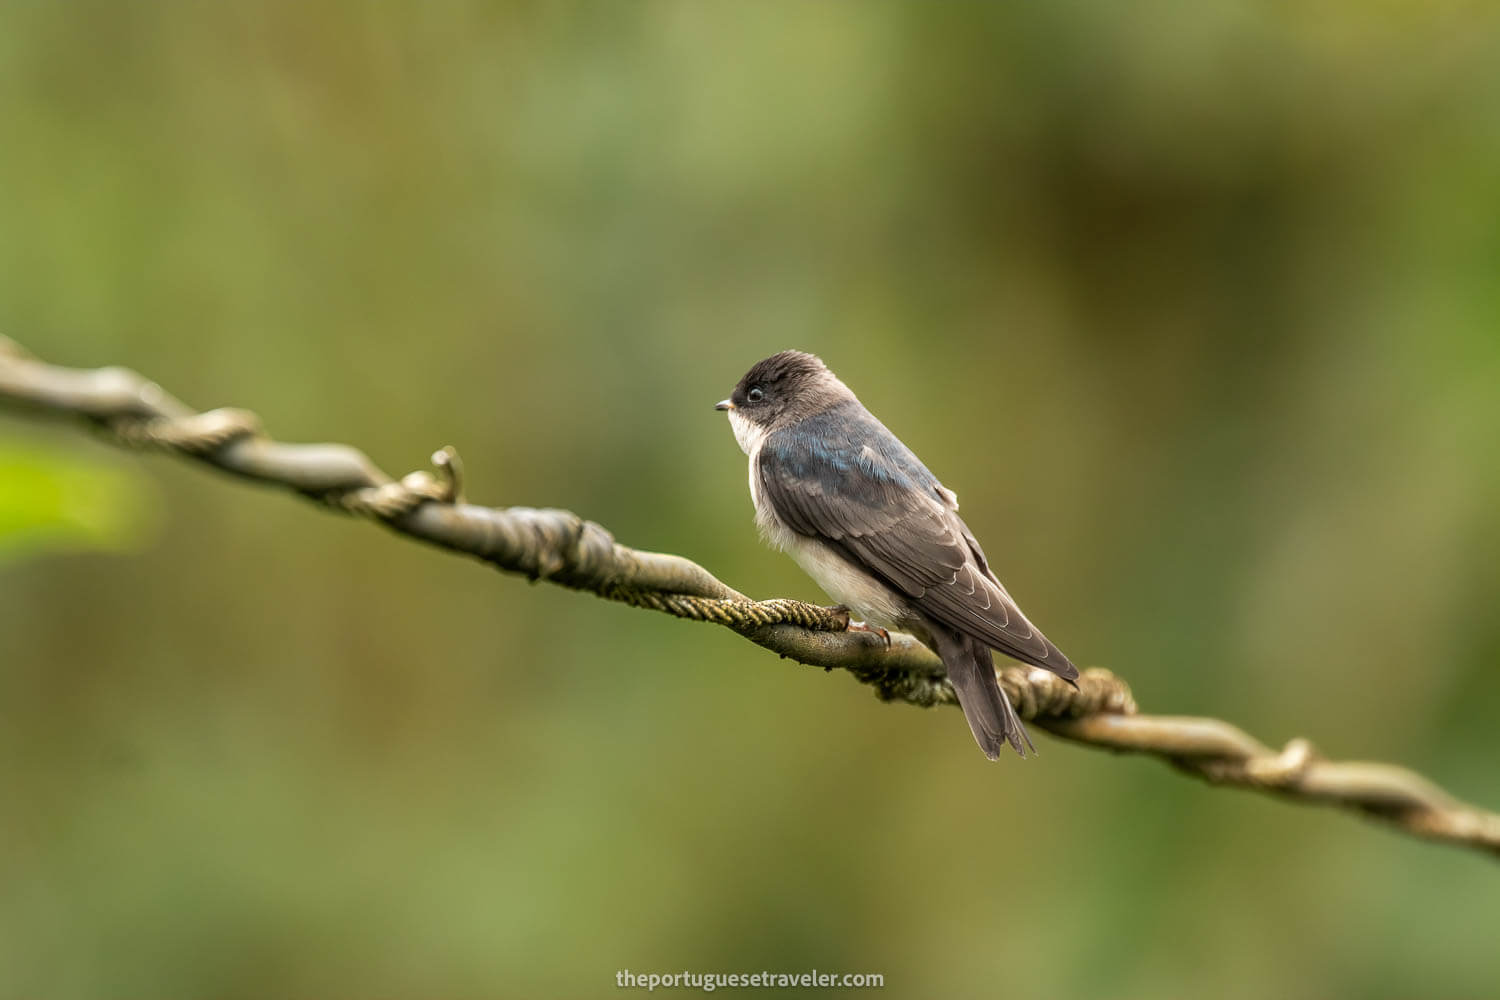 A Brown Bellied Swallow on the Birdwatching Tour in Mindo